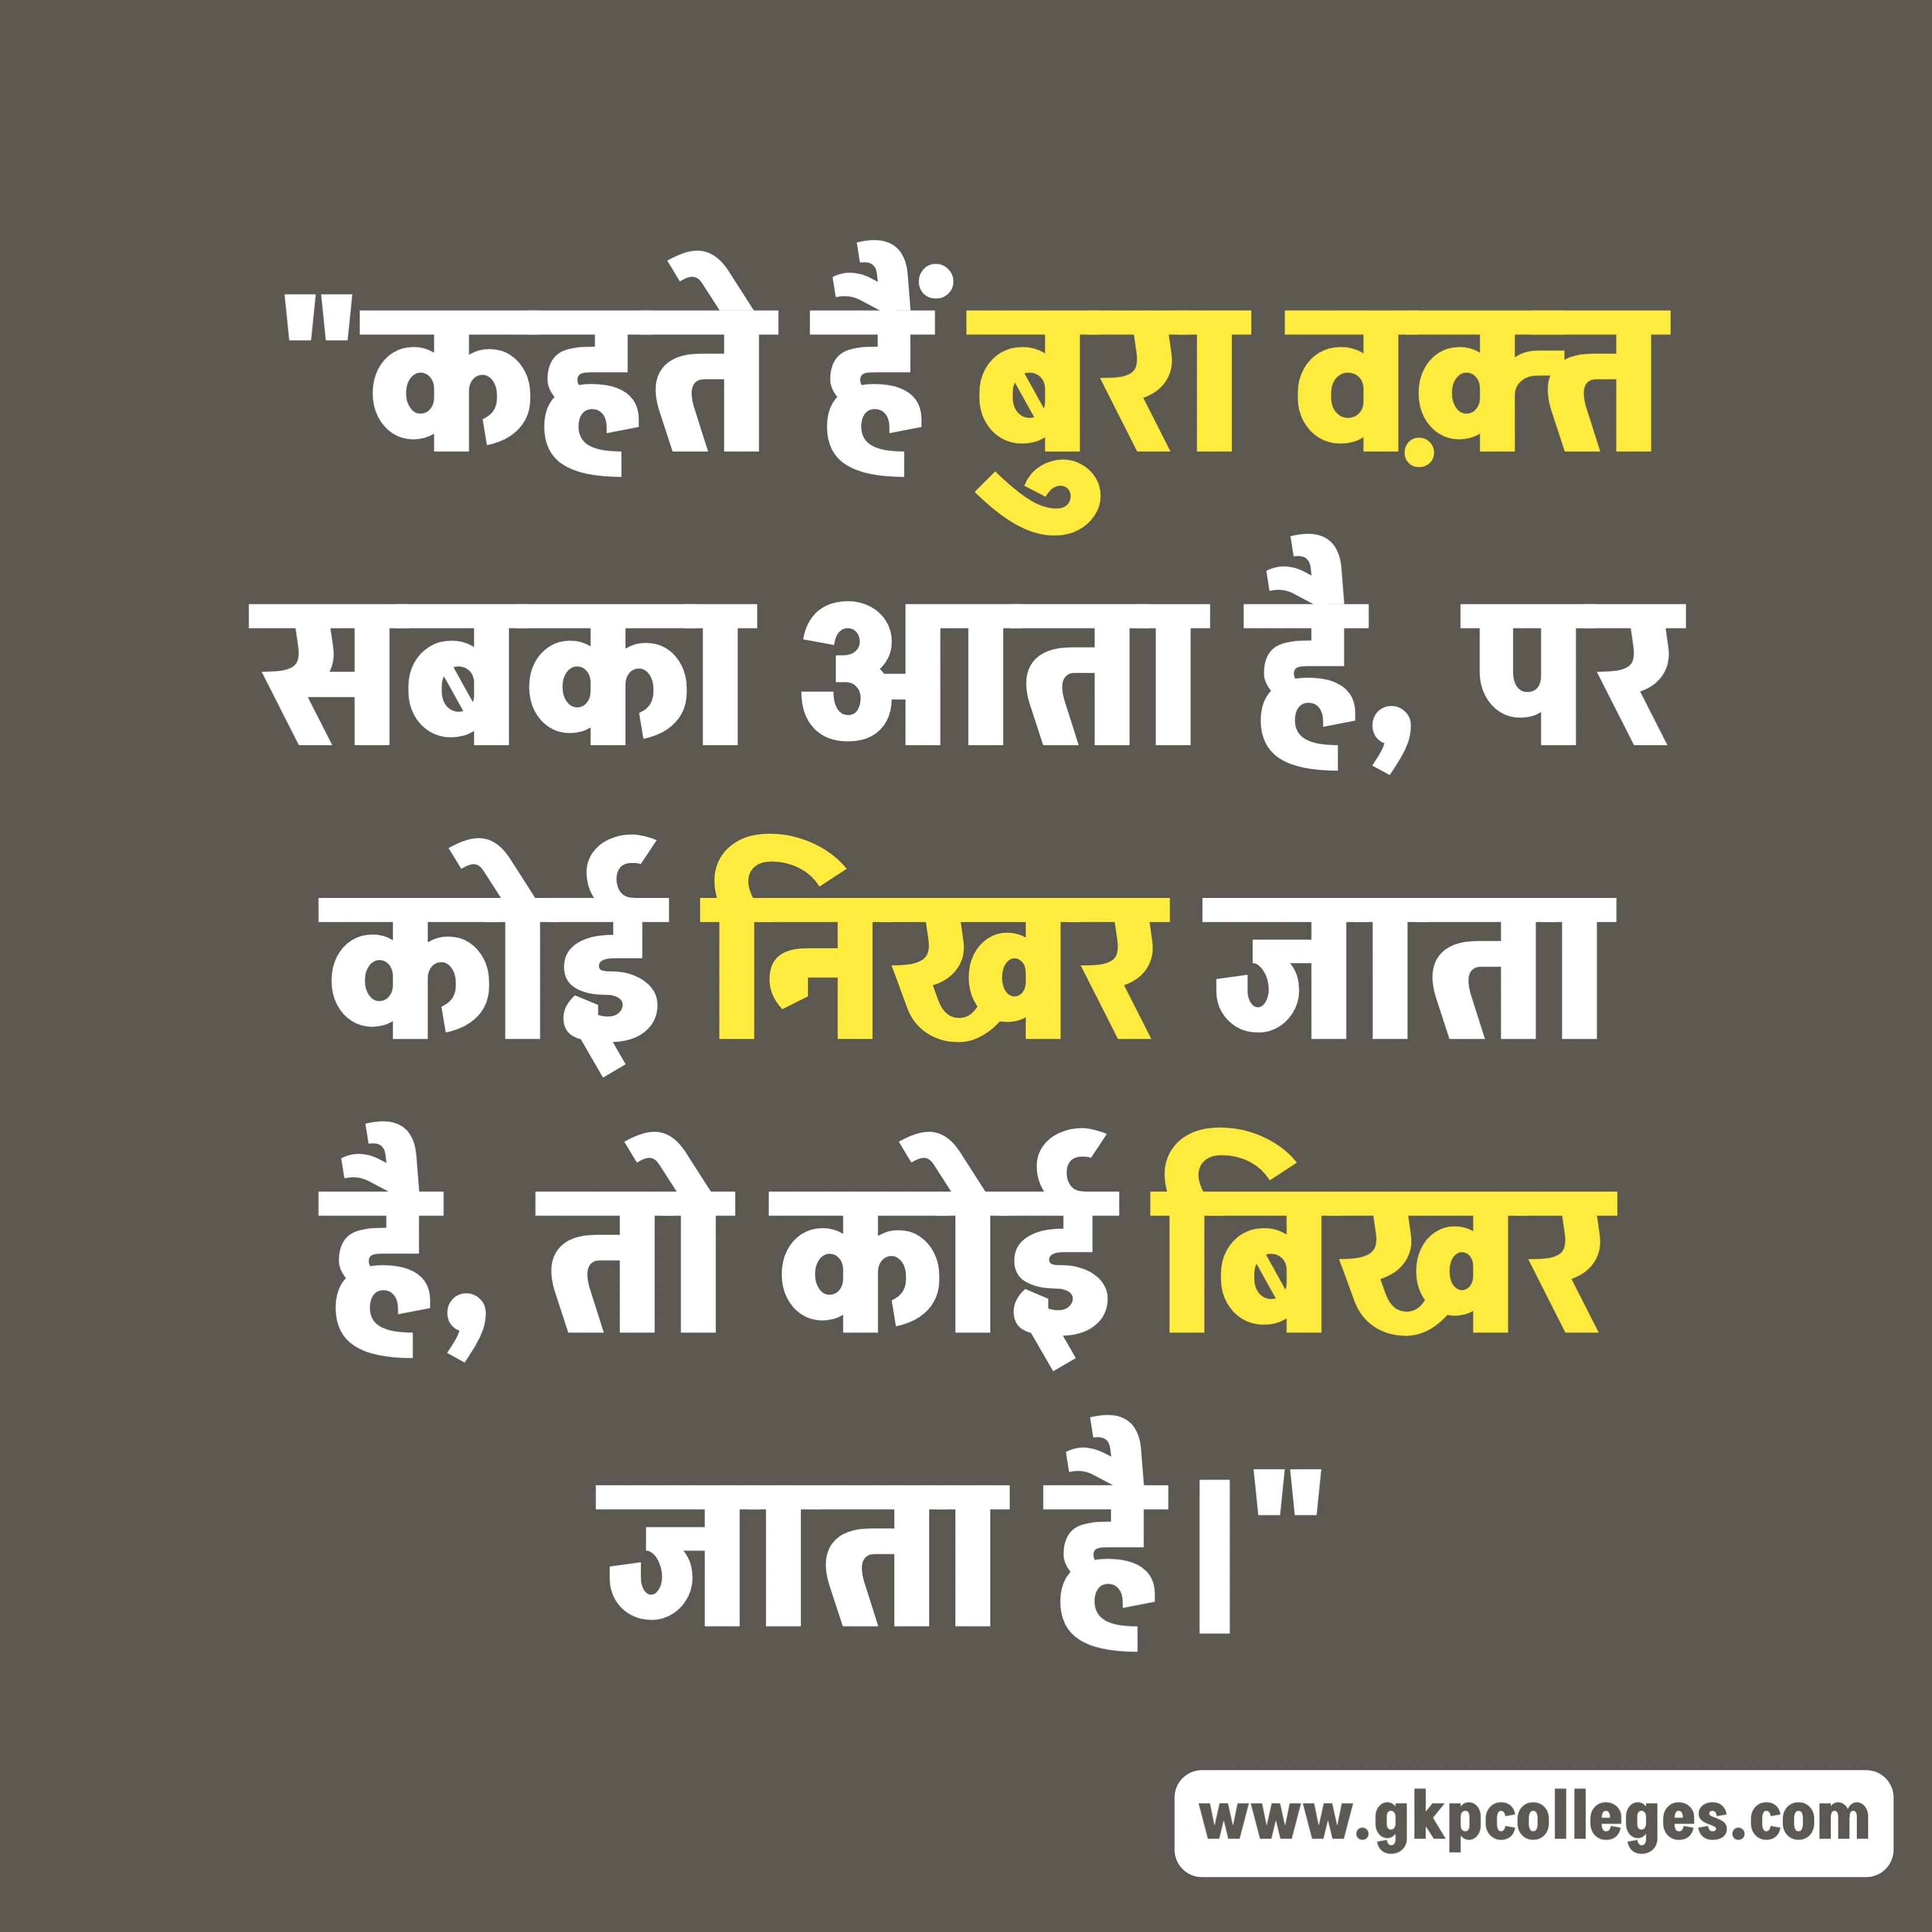 Best Hindi Quotes on Life 3